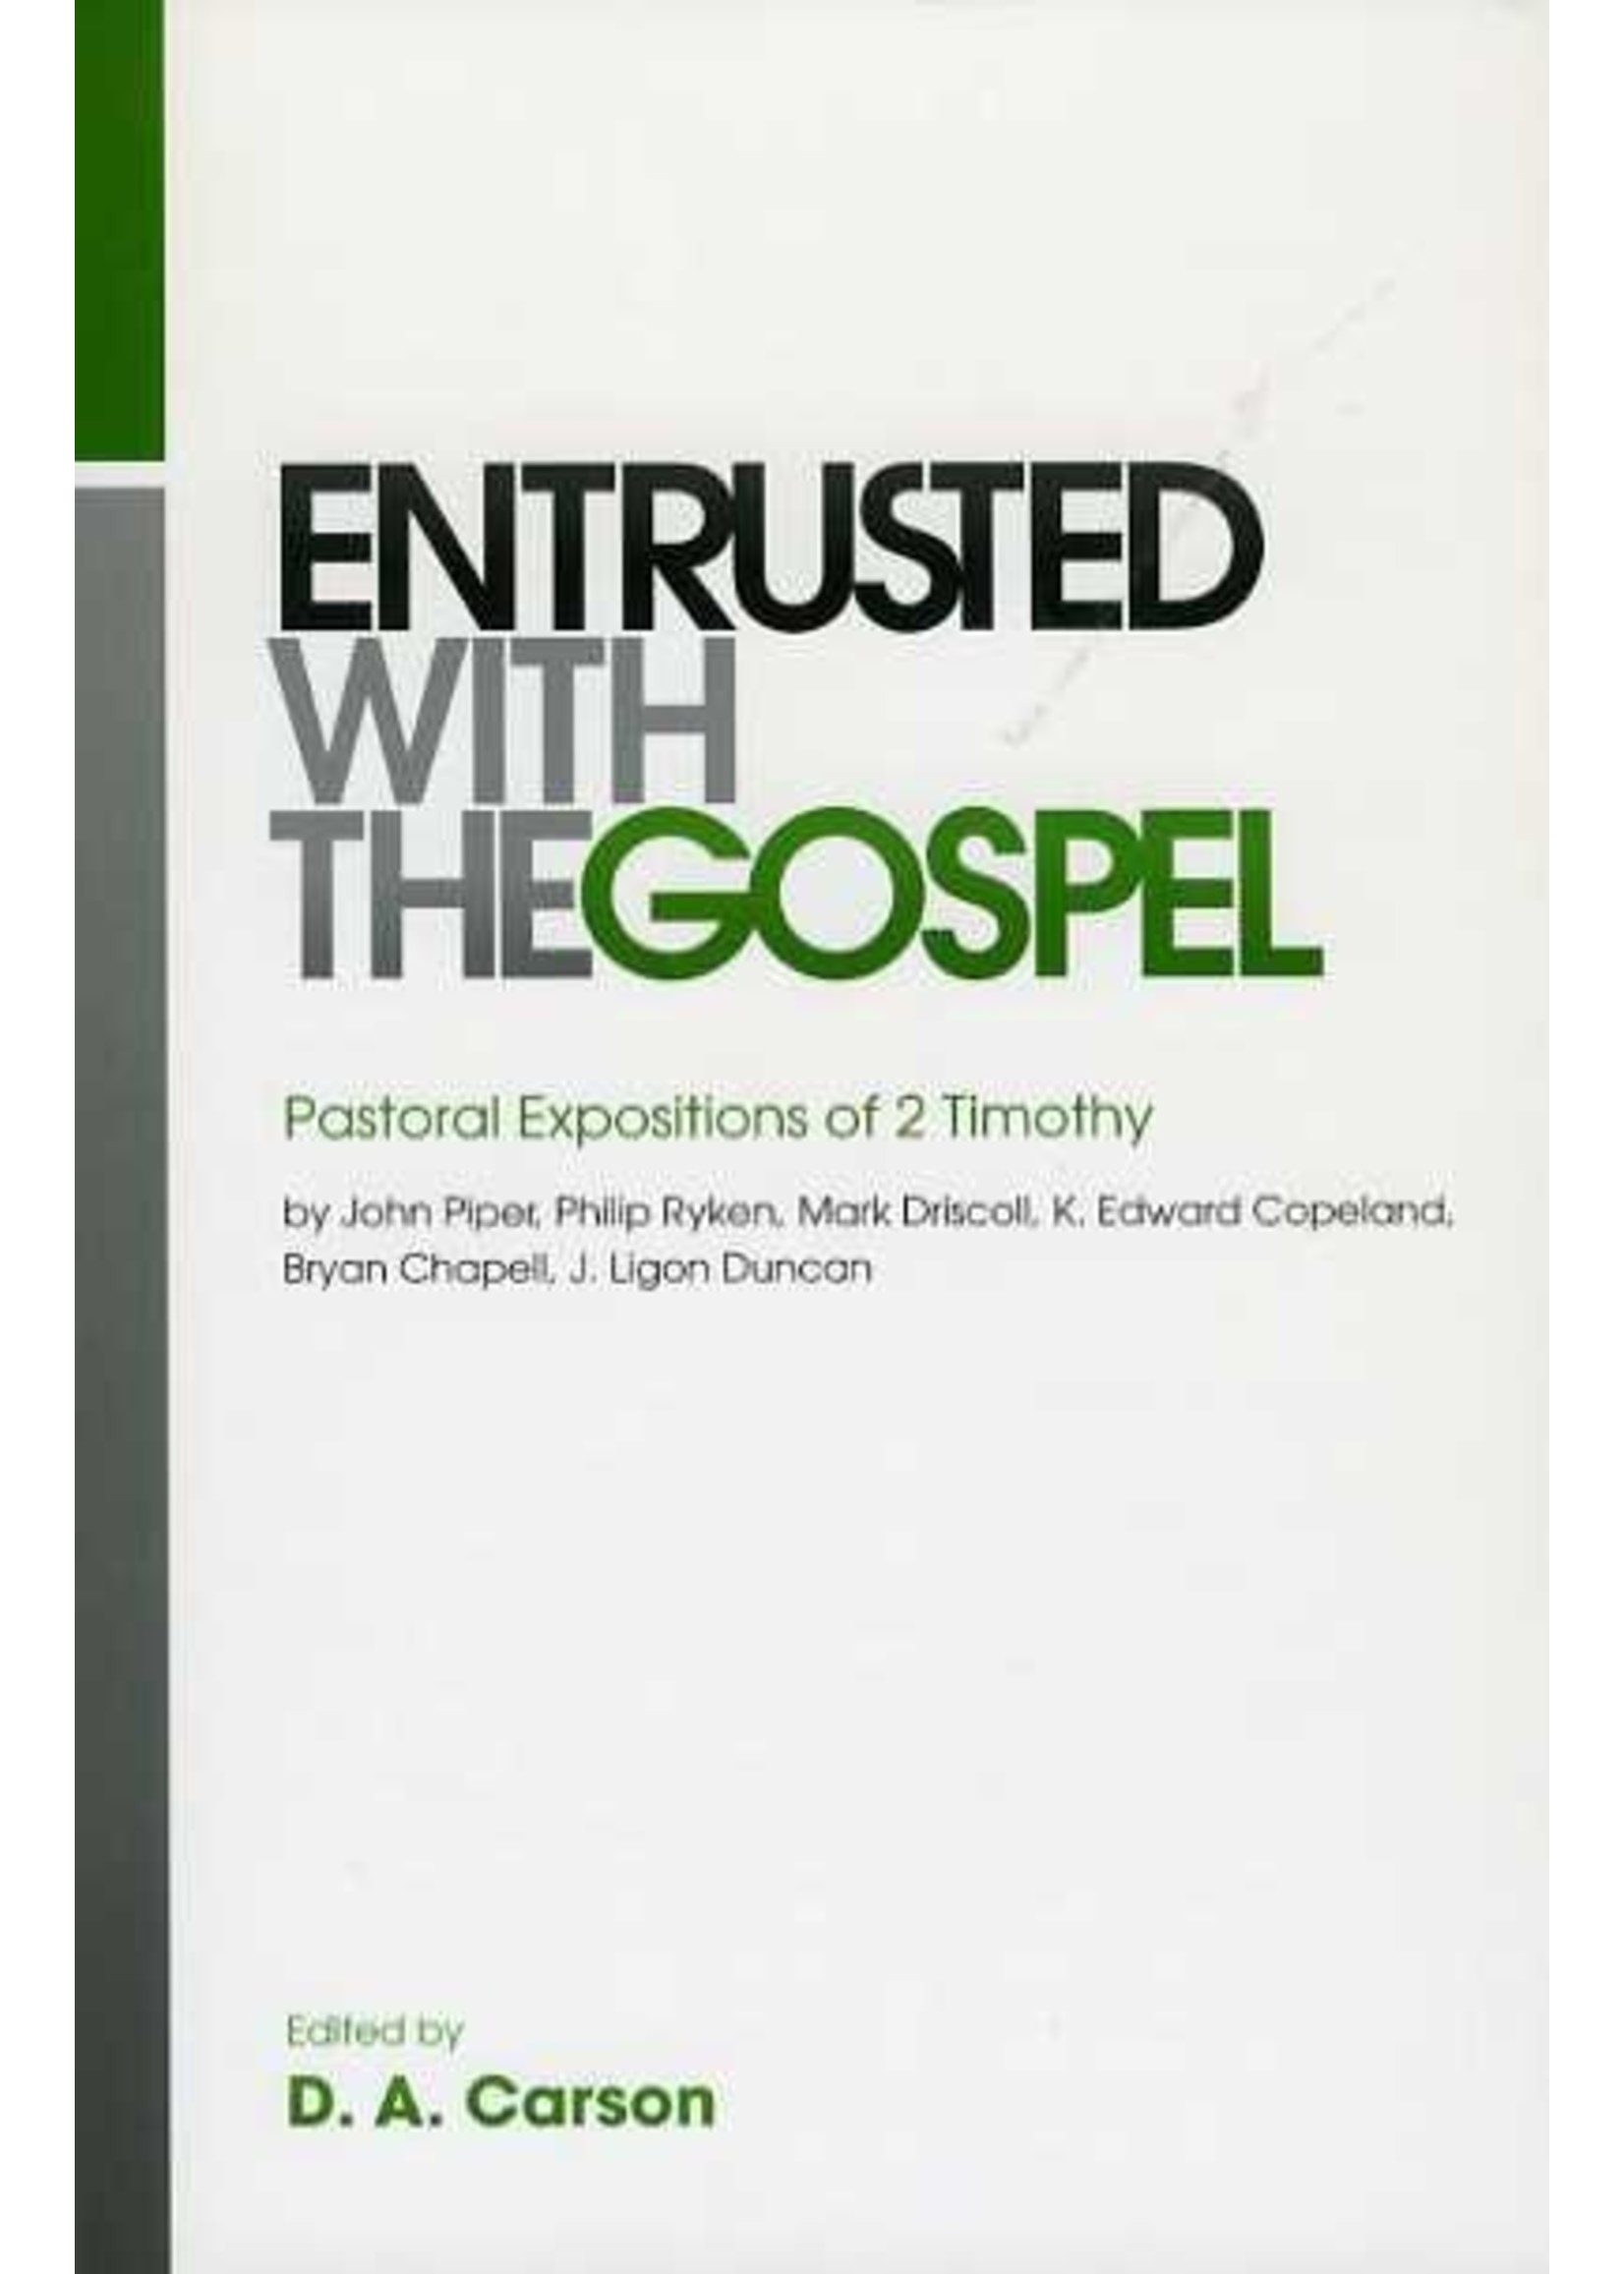 Crossway Entrusted with the Gospel - D. A. Carson